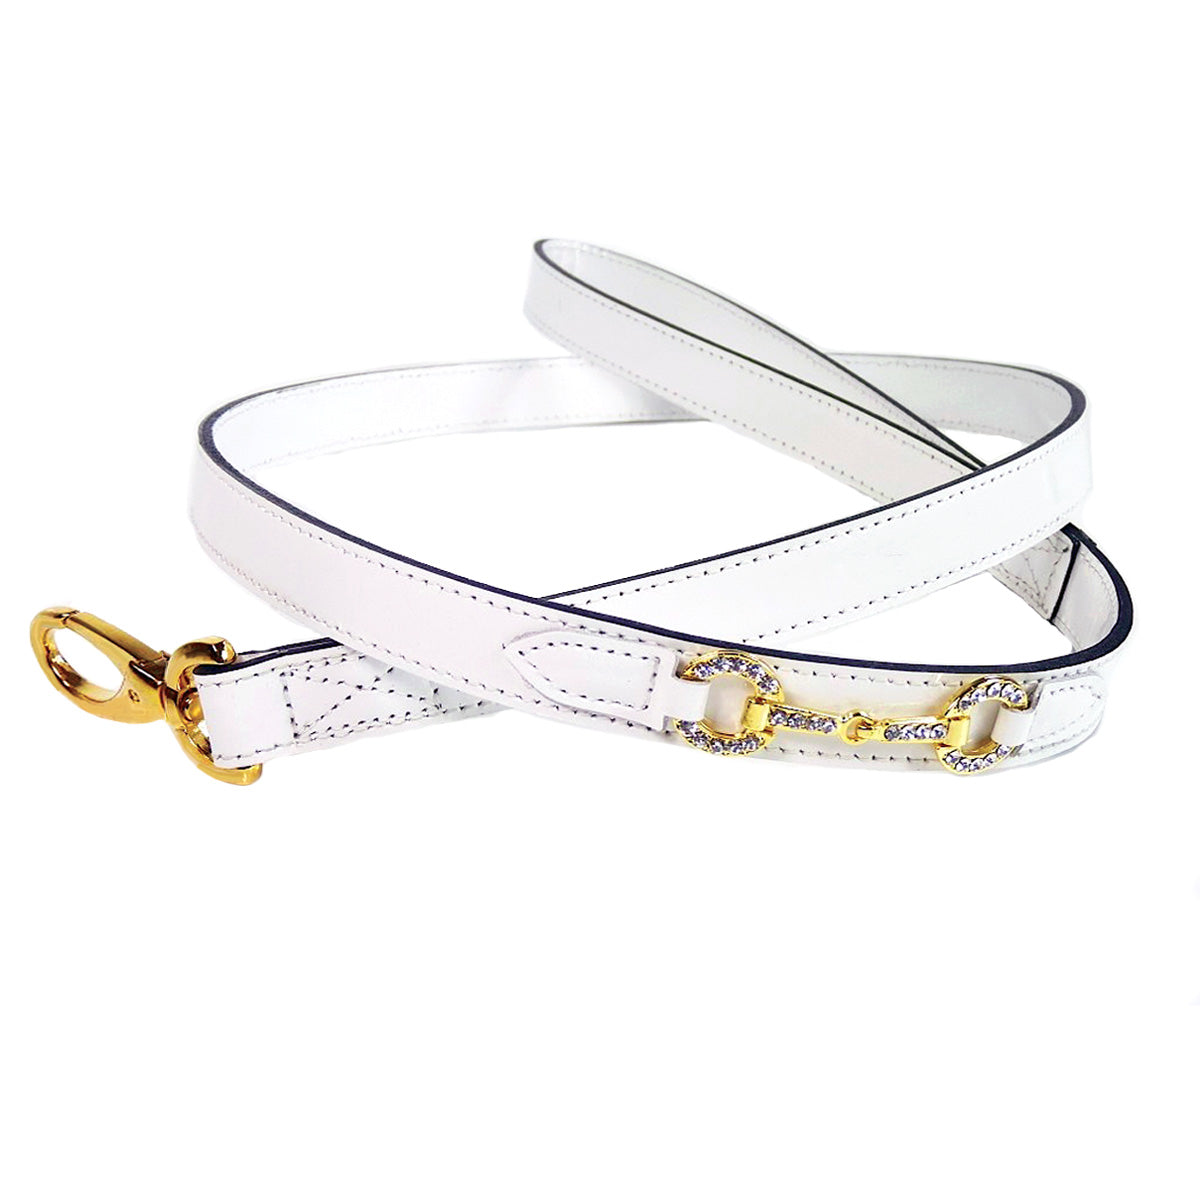 Holiday Dog Leash in White Patent & Gold